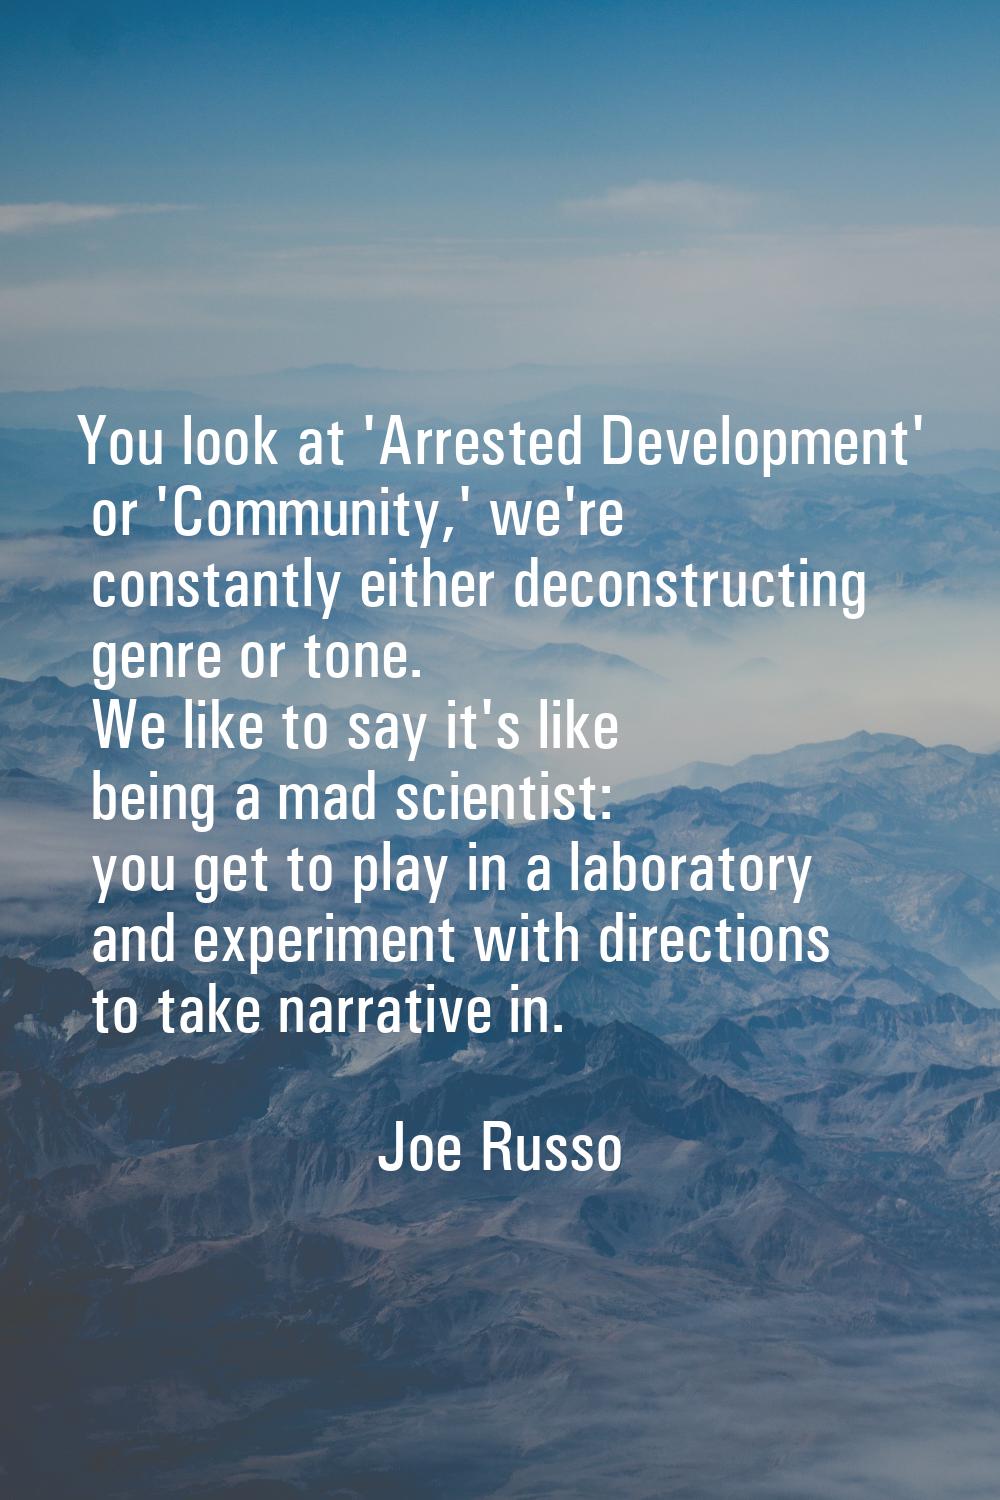 You look at 'Arrested Development' or 'Community,' we're constantly either deconstructing genre or 